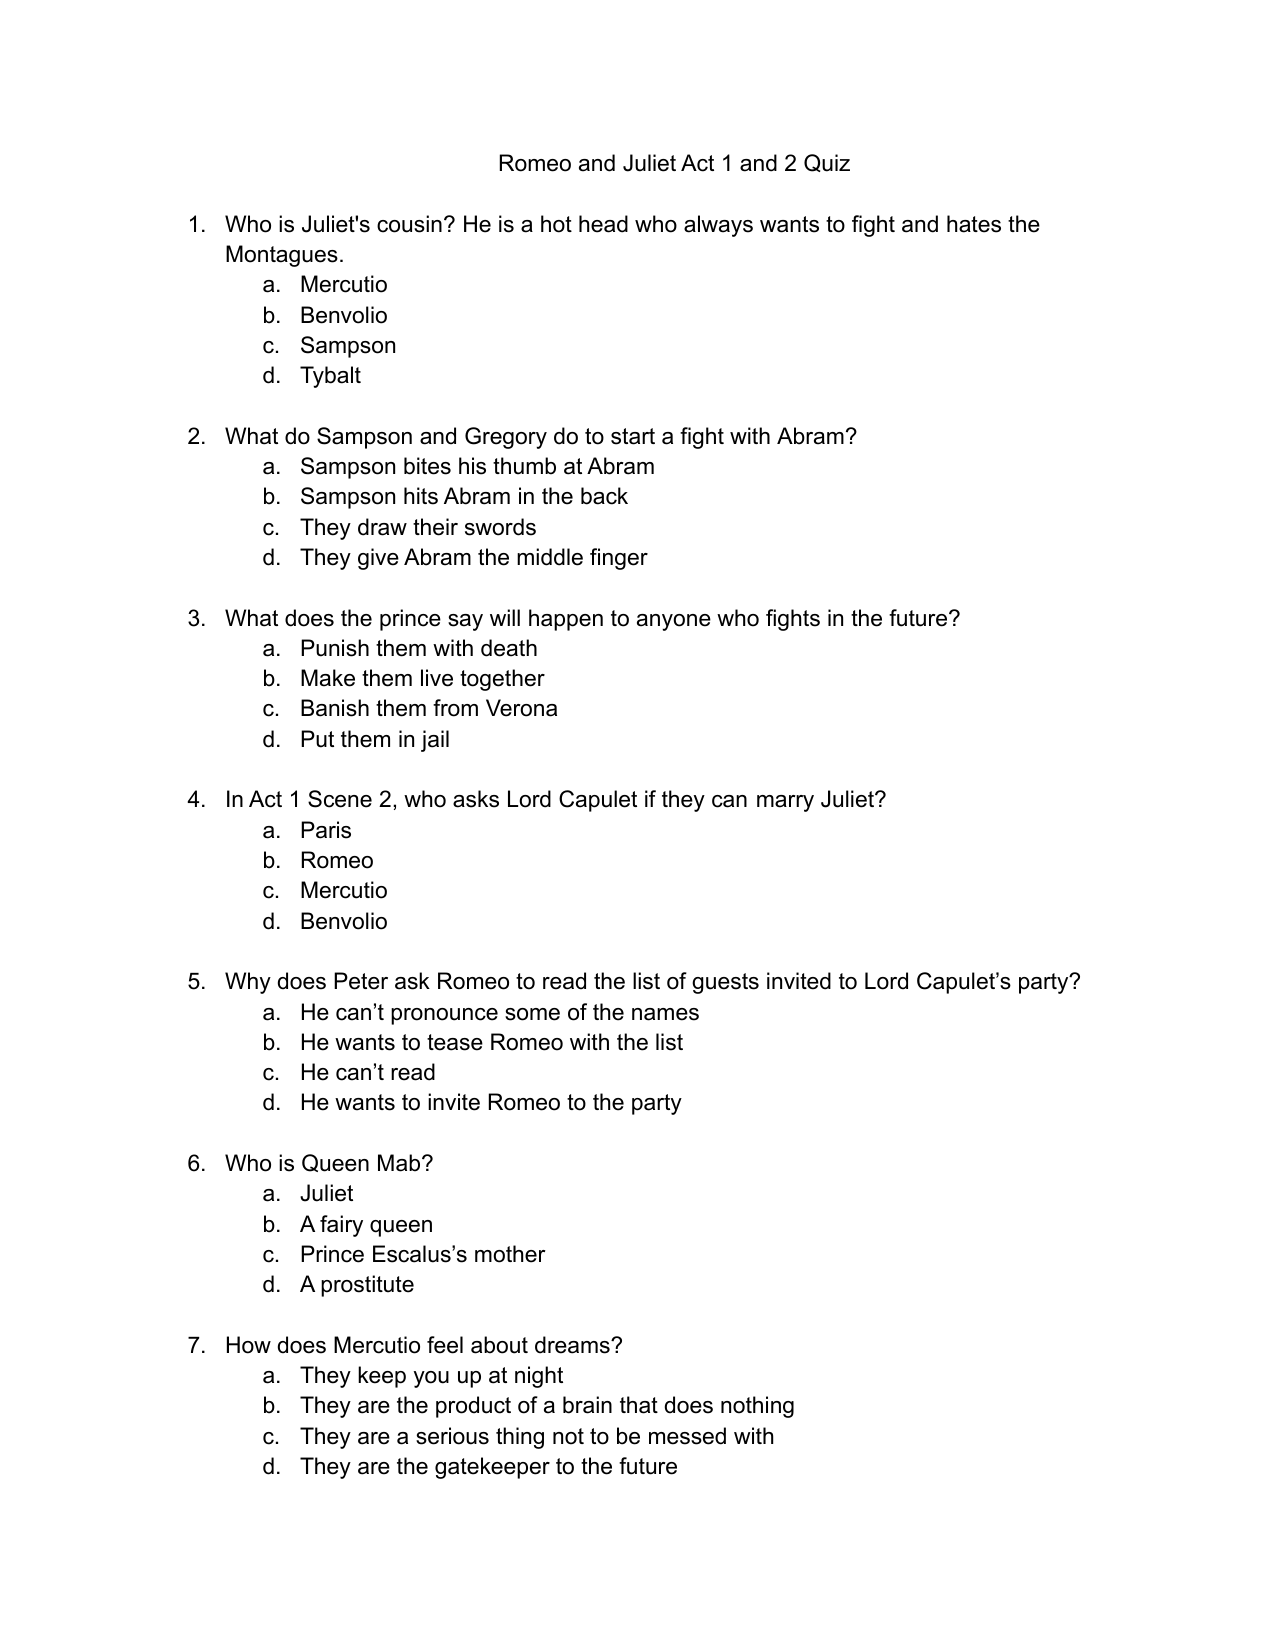 romeo and juliet act 1 questions